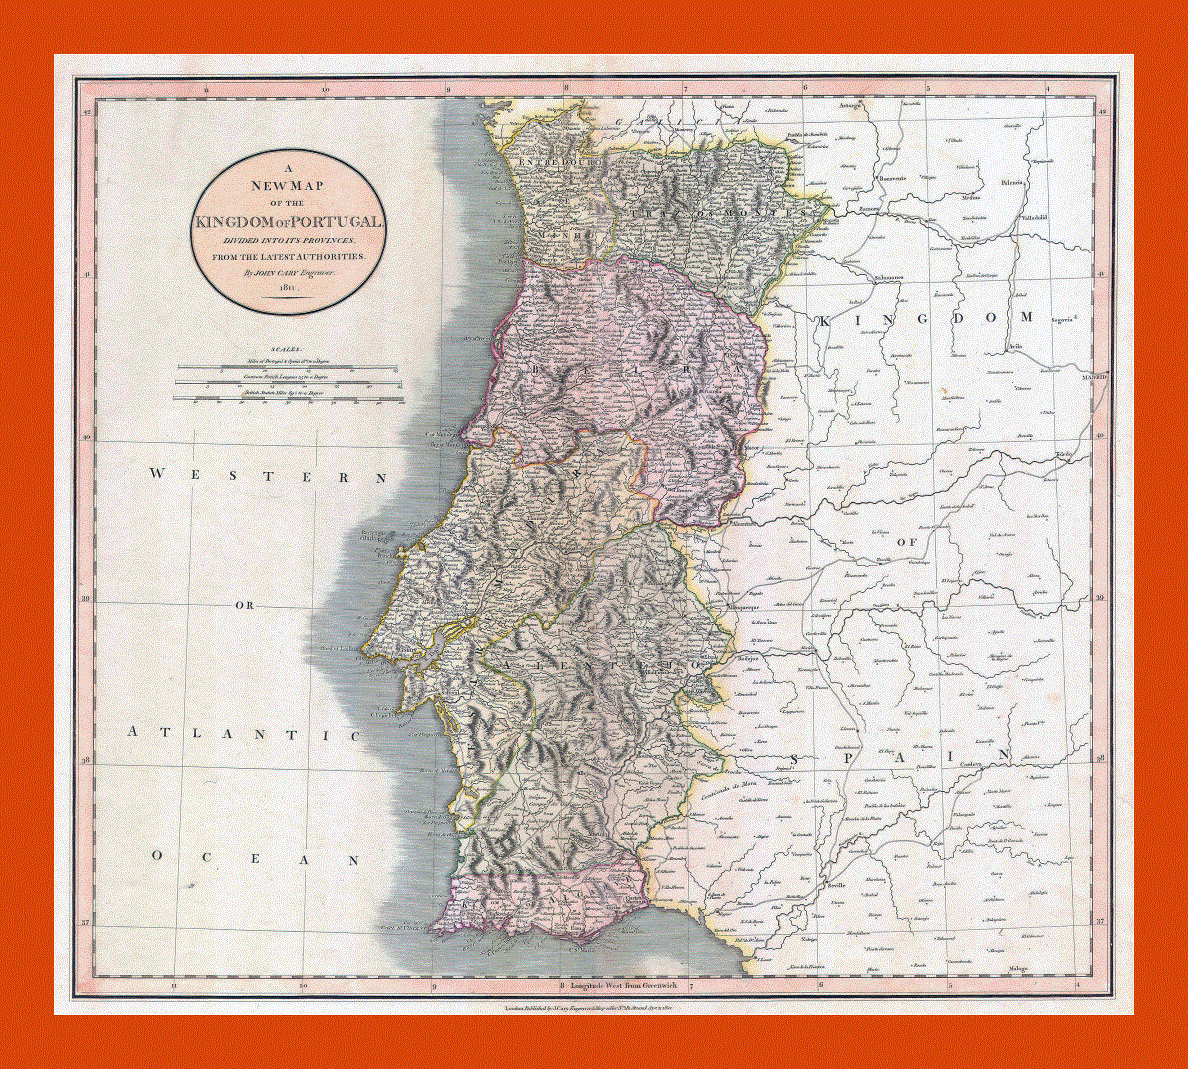 Old political and administrative map of Portugal - 1811